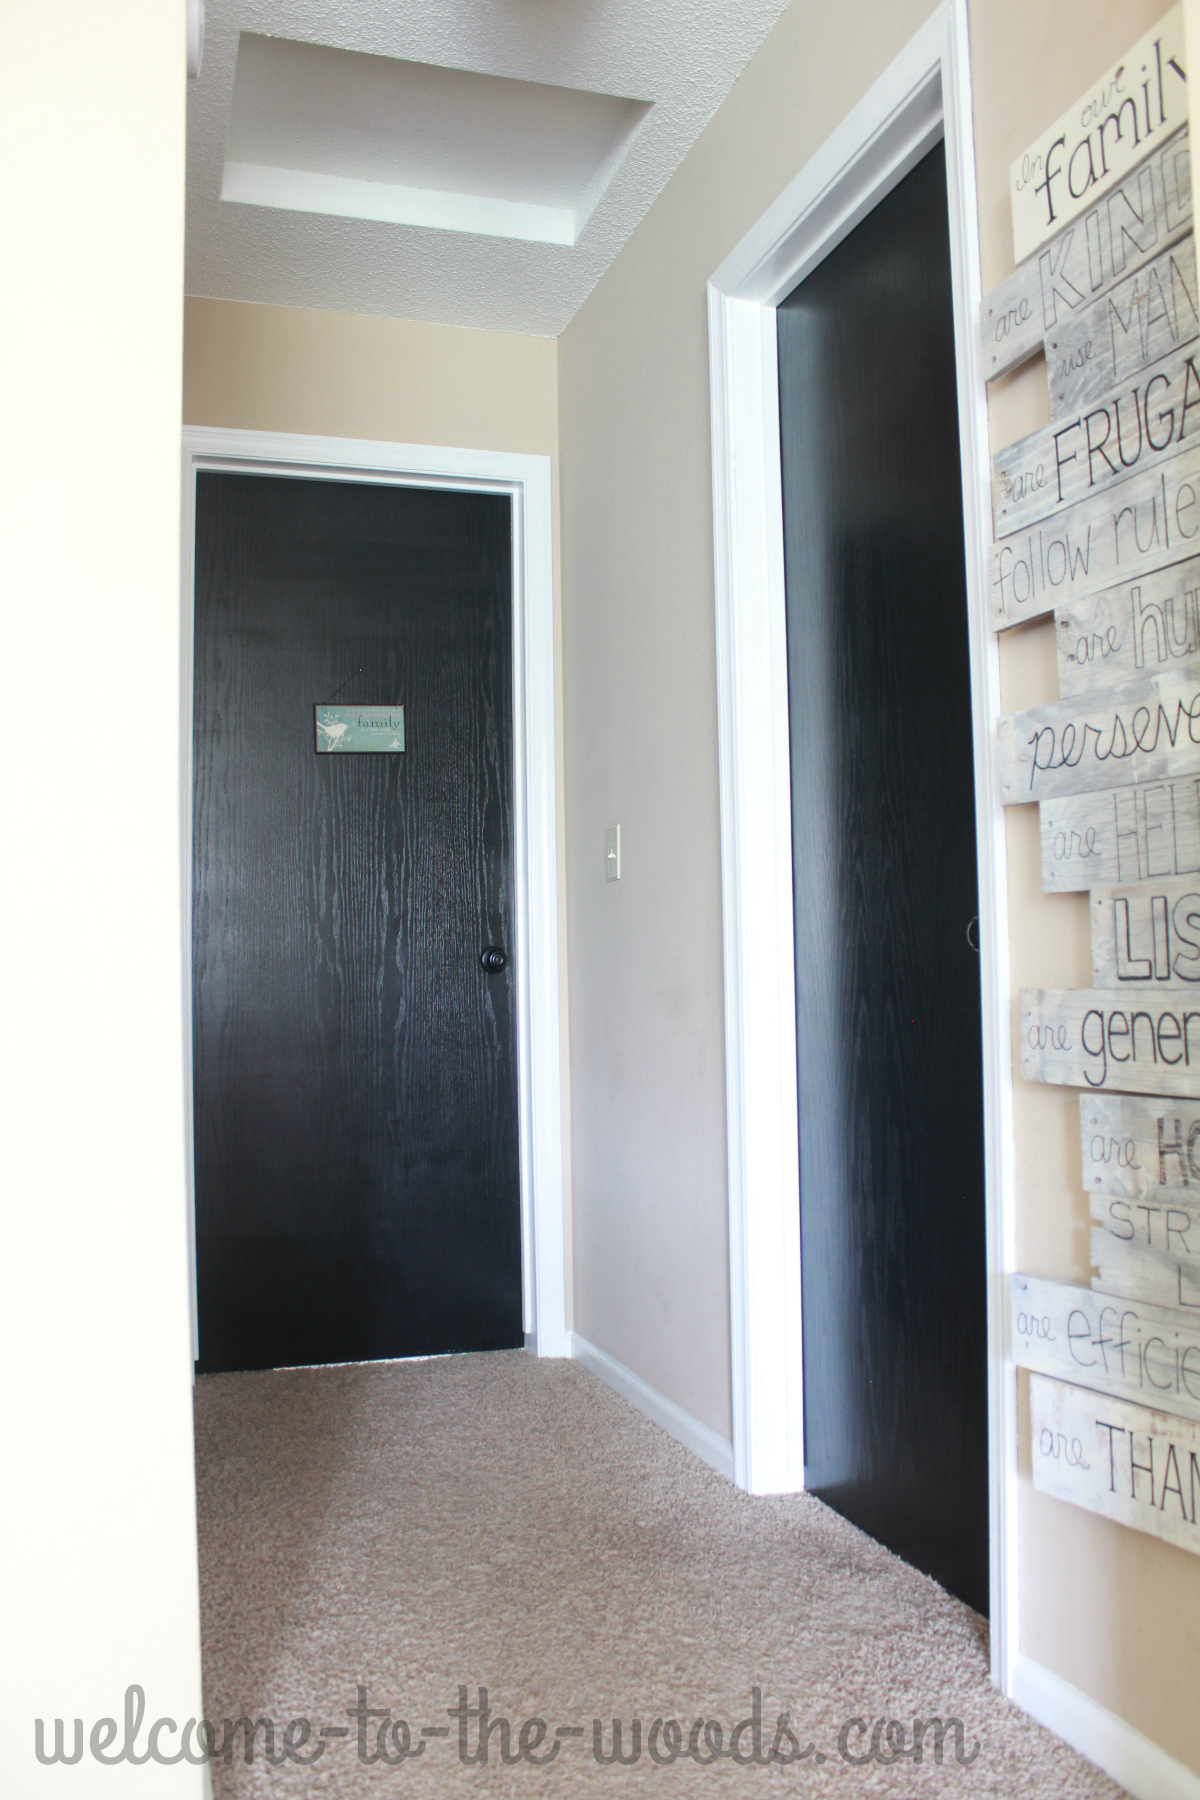 Hallway decor ideas. White trim, black doors, and a tall skinny wood pallet sign.